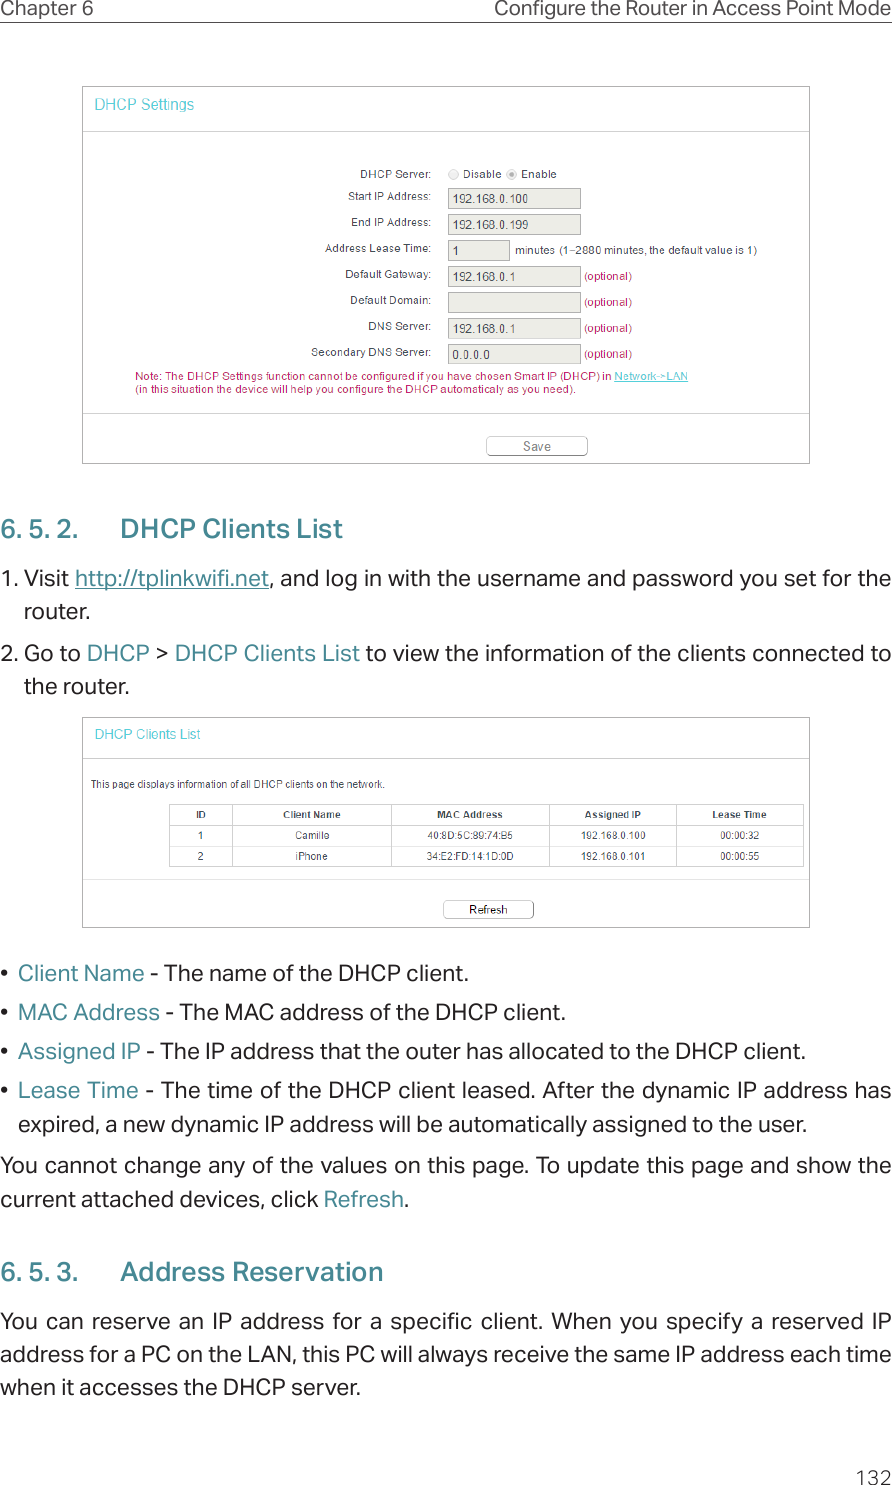 132Chapter 6 Congure the Router in Access Point Mode6. 5. 2.  DHCP Clients List1. Visit http://tplinkwifi.net, and log in with the username and password you set for the router.2. Go to DHCP &gt; DHCP Clients List to view the information of the clients connected to the router.•  Client Name - The name of the DHCP client.•  MAC Address - The MAC address of the DHCP client. •  Assigned IP - The IP address that the outer has allocated to the DHCP client.•  Lease Time - The time of the DHCP client leased. After the dynamic IP address has expired, a new dynamic IP address will be automatically assigned to the user.  You cannot change any of the values on this page. To update this page and show the current attached devices, click Refresh.6. 5. 3.  Address ReservationYou can reserve an IP address for a specific client. When you specify a reserved IP address for a PC on the LAN, this PC will always receive the same IP address each time when it accesses the DHCP server.